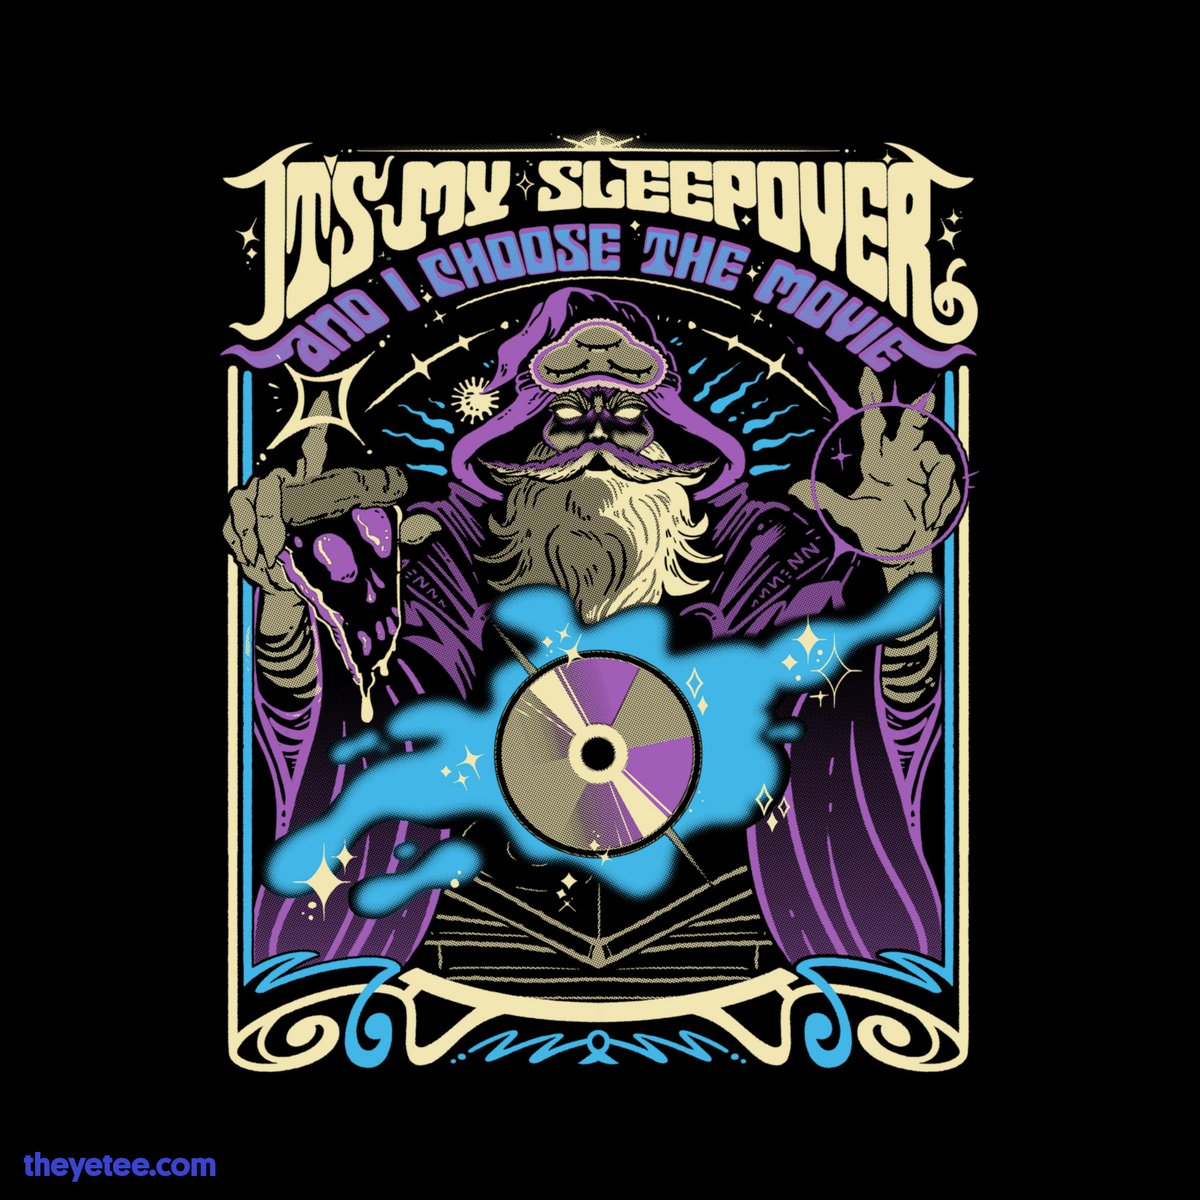 「MOTHER HATH SAYETH 'TWAS MINE TURN TO SE」|The Yetee 🌈のイラスト